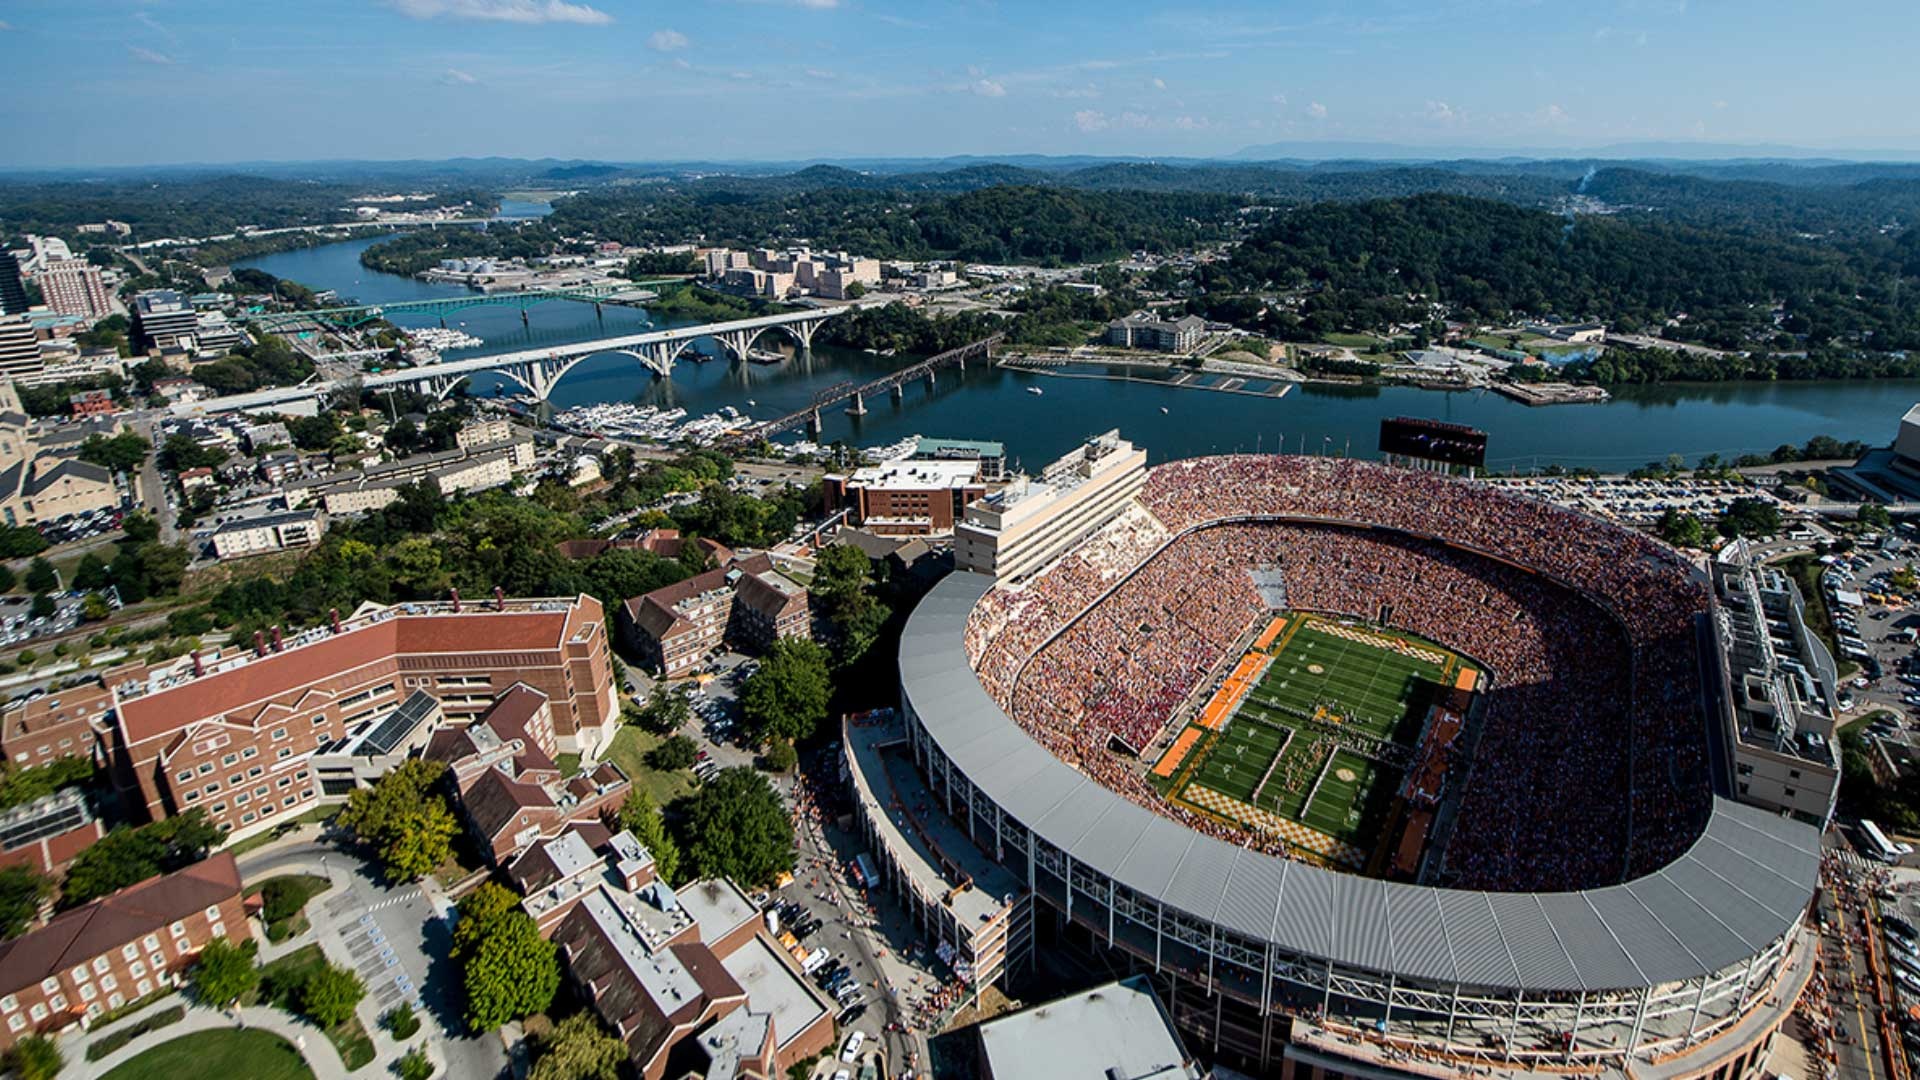 University of Tennessee, Admissions process, Knoxville campus, Undergraduate opportunities, 1920x1080 Full HD Desktop